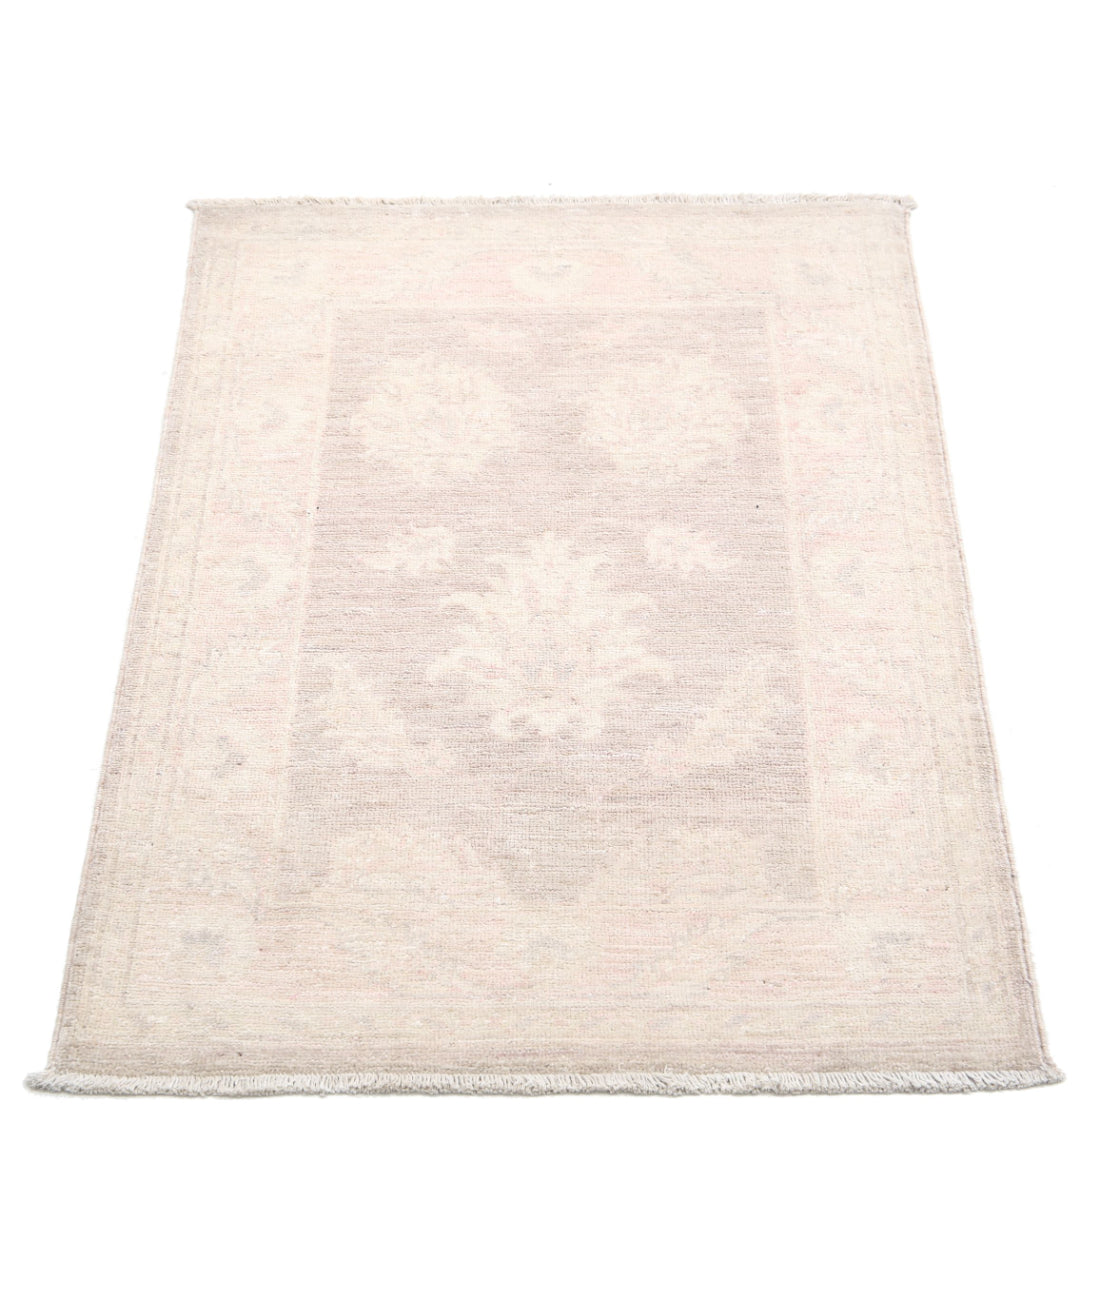 Hand Knotted Serenity Wool Rug - 2'1'' x 3'1'' 2'1'' x 3'1'' (63 X 93) / Brown / Ivory